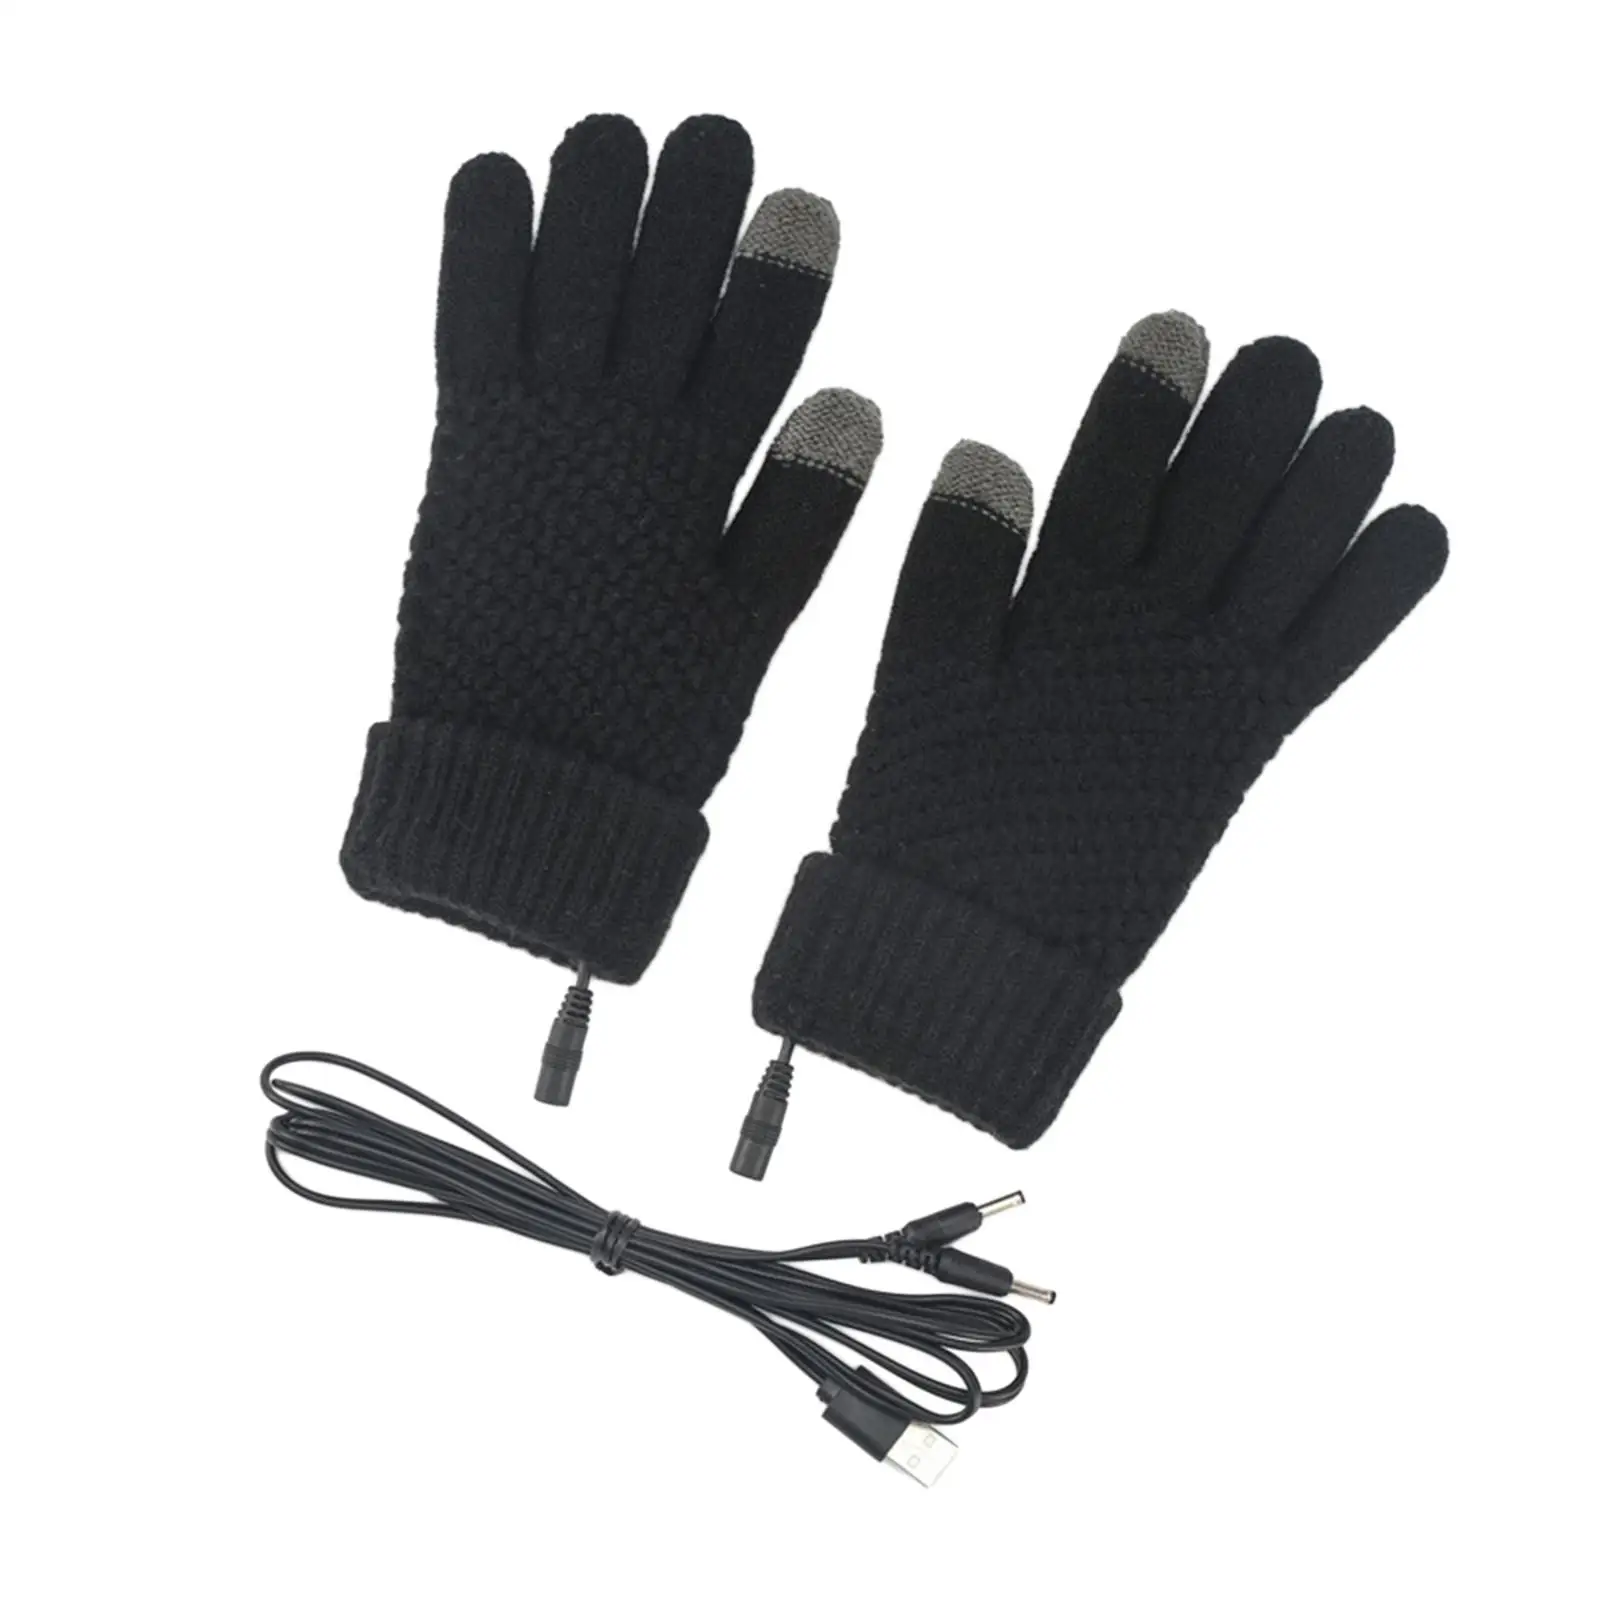 USB Heated Gloves Connected to Laptop Adapter for Warm Electric Warm Gloves for Hiking Camping Cycling Outdoor Winter Gift